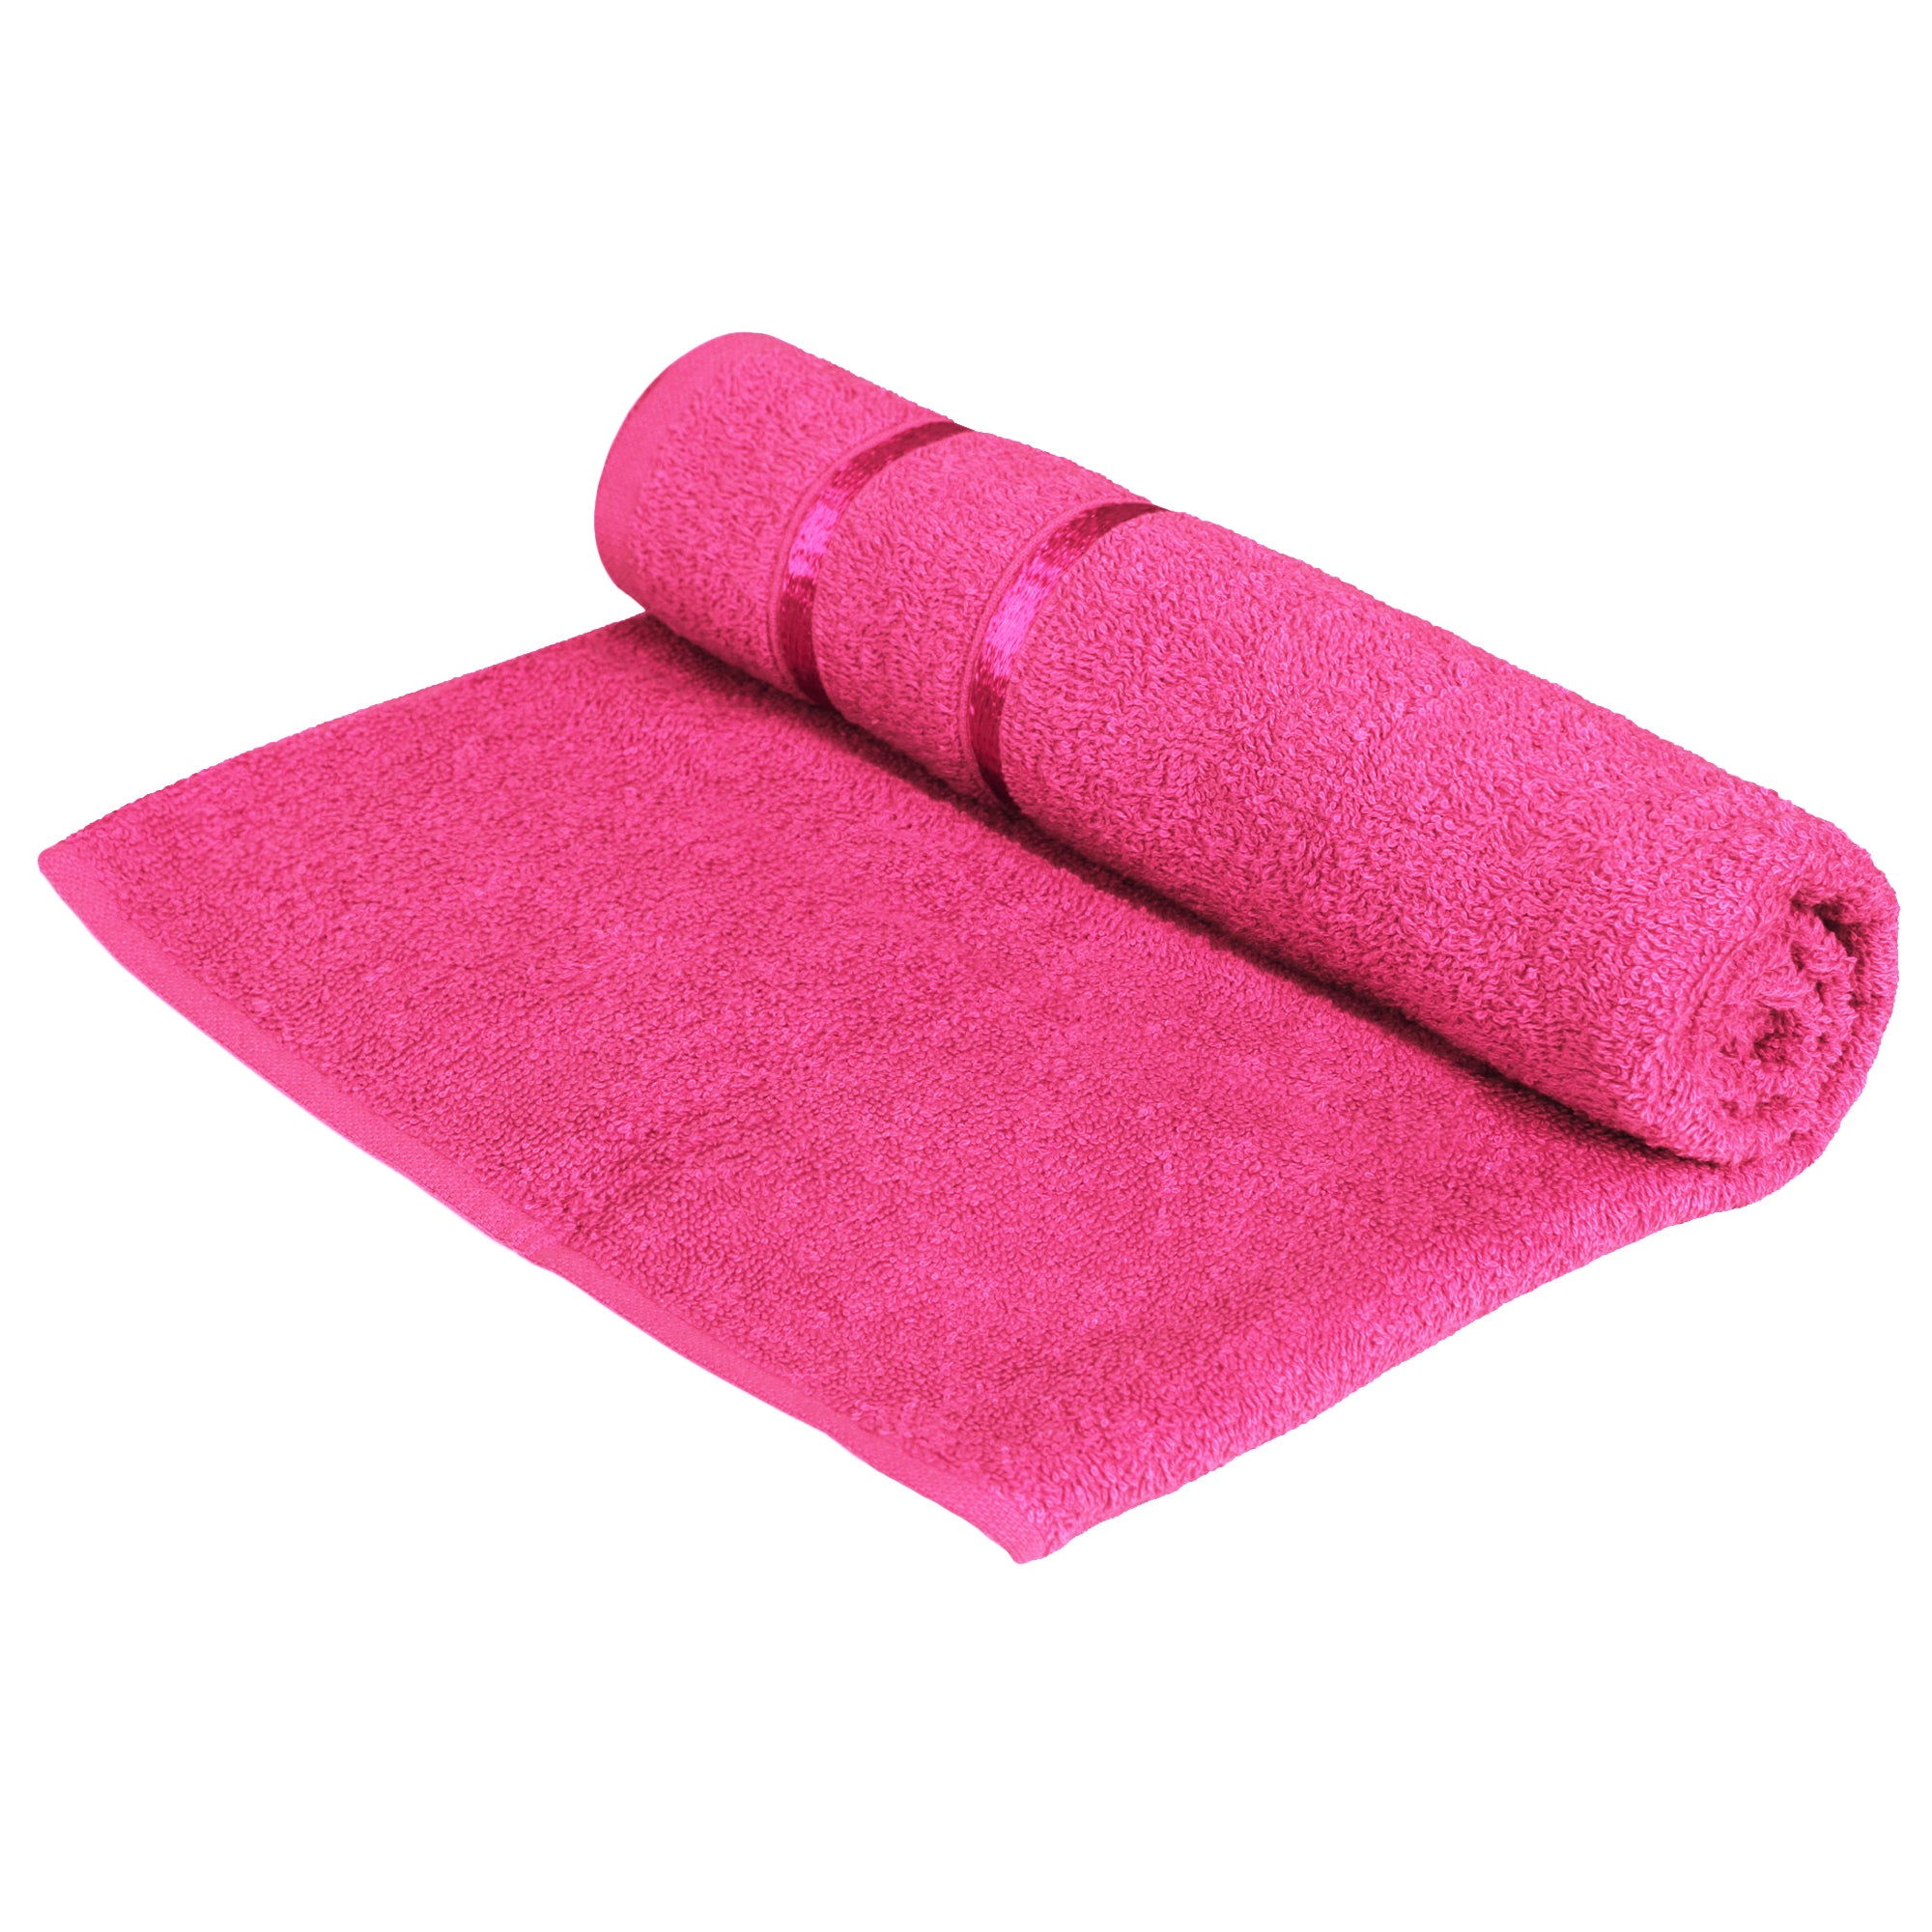 Story@Home 2 Units 100% Cotton Ladies Bath Towels - White and Pink